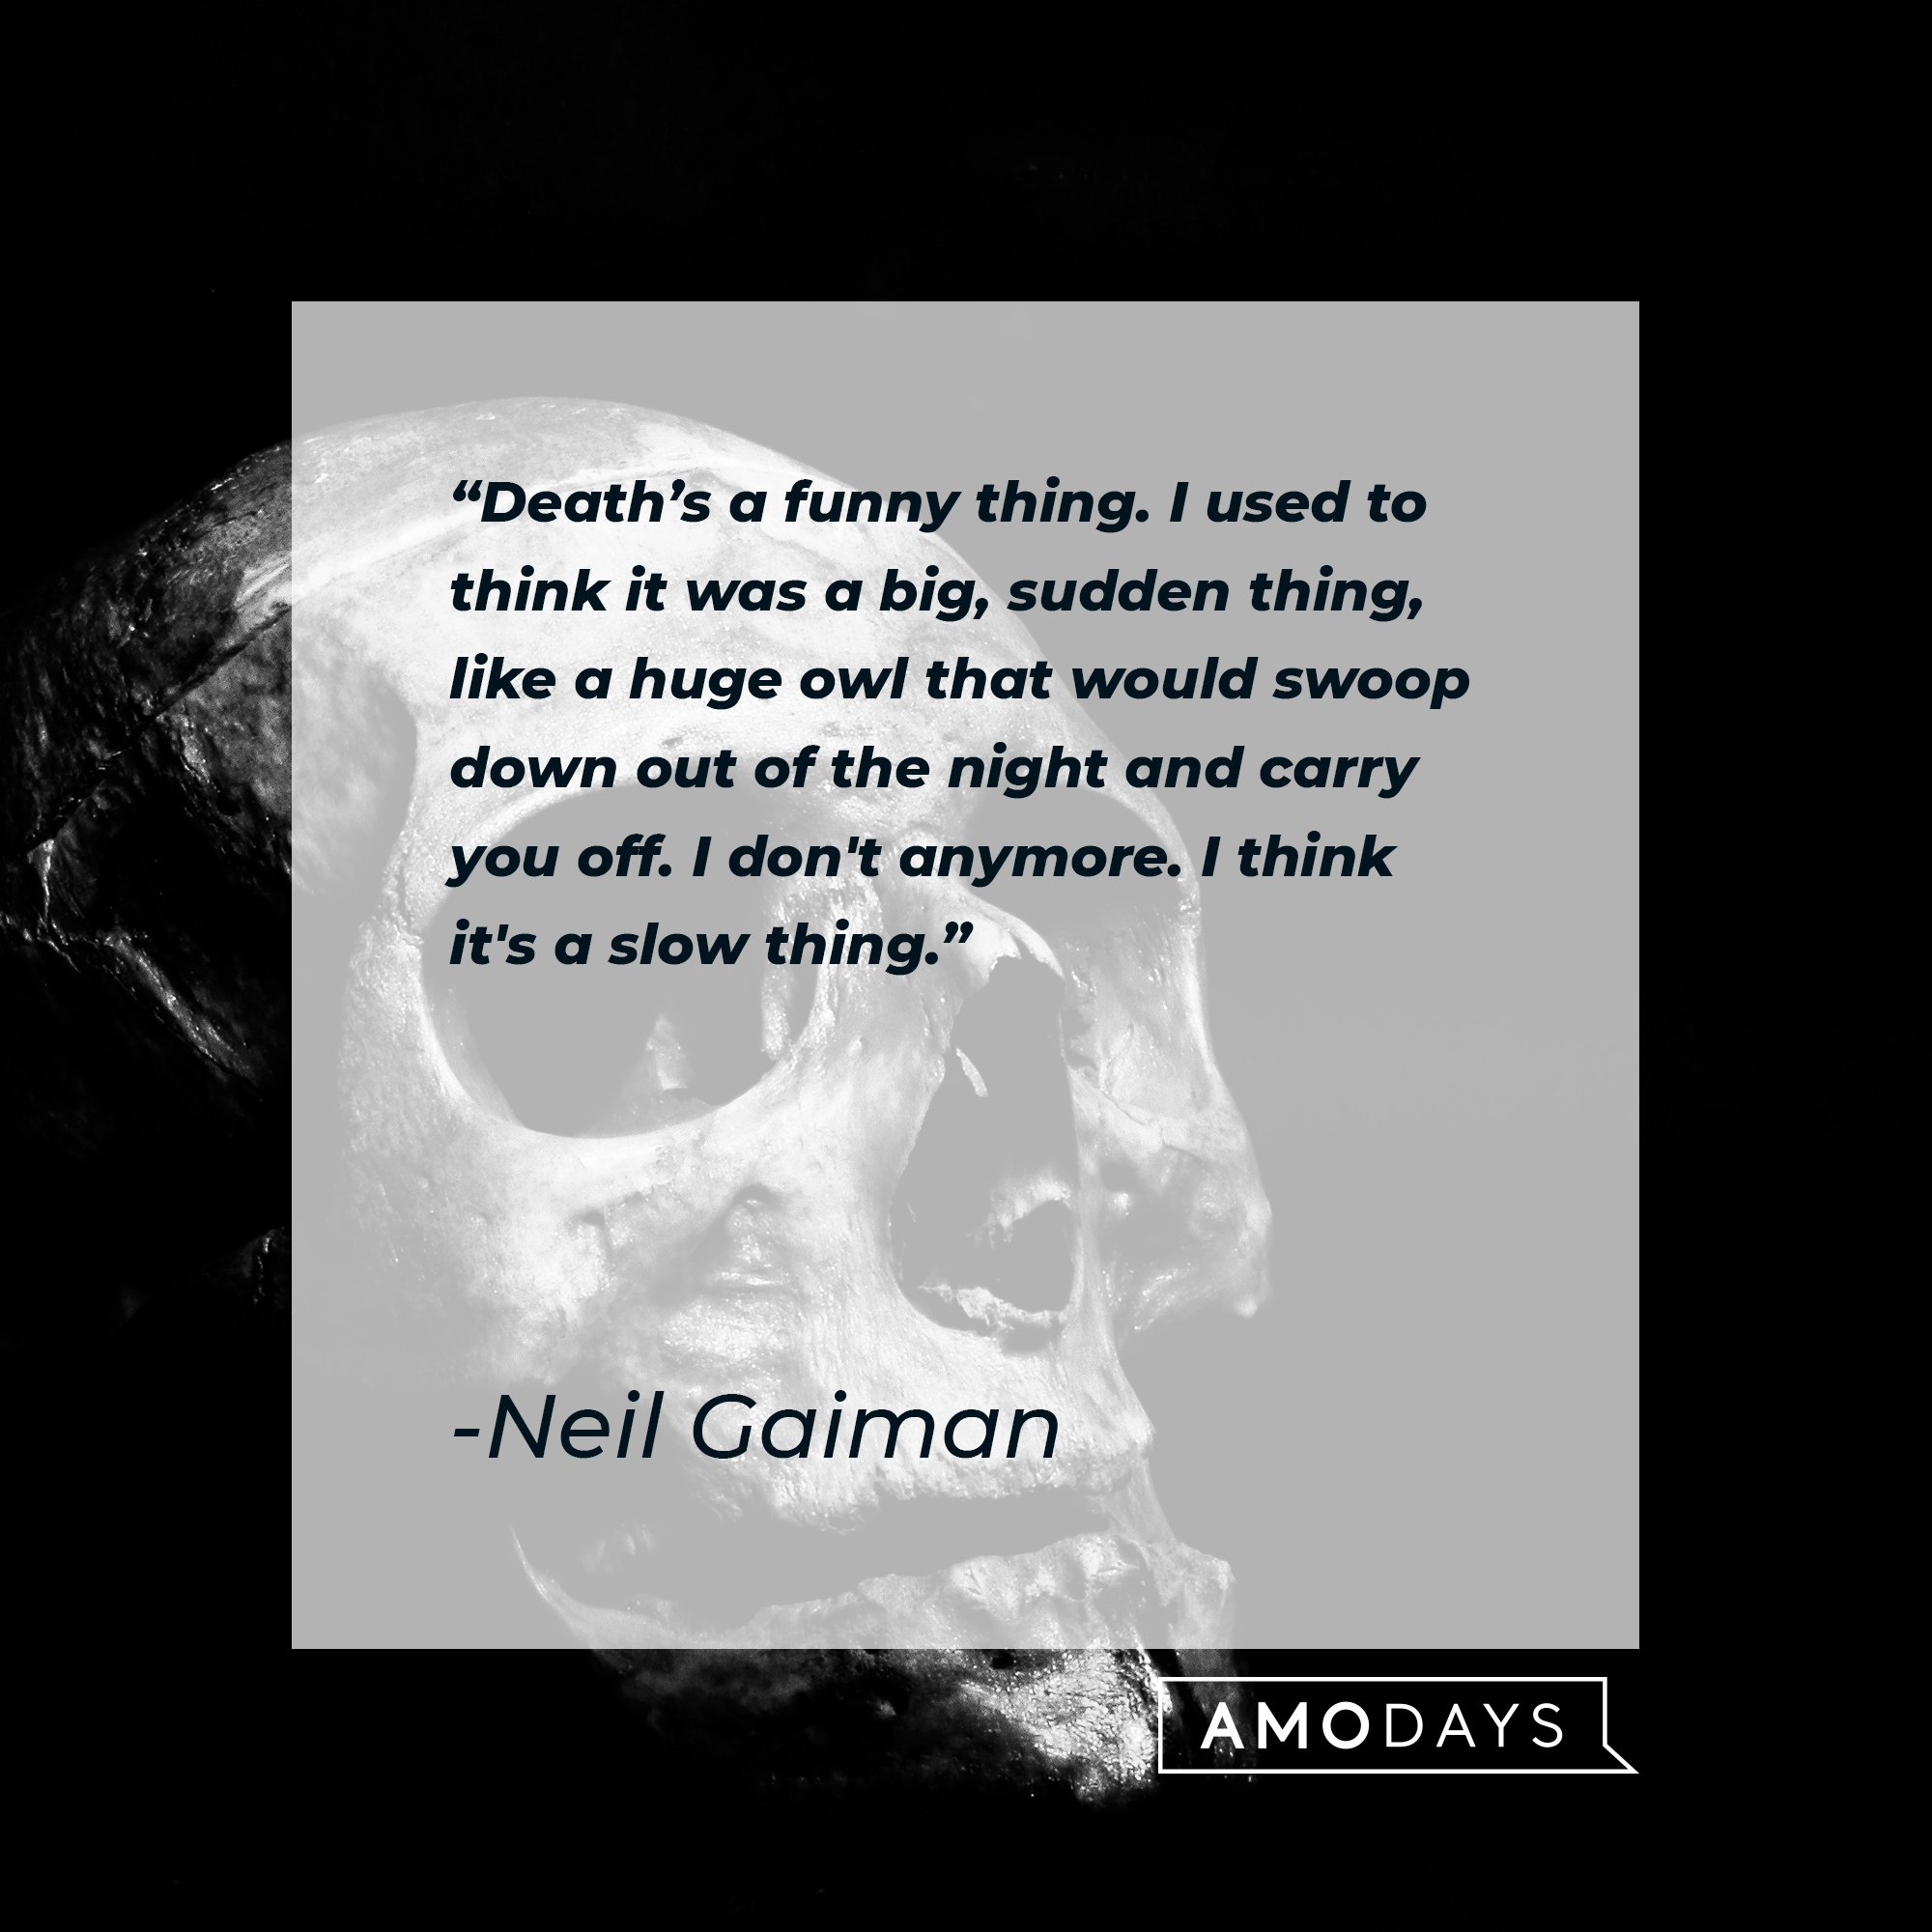  Neil Gaiman's quote: "Death's a funny thing. I used to think it was a big, sudden thing, like a huge owl that would swoop down out of the night and carry you off. I don't anymore. I think it's a slow thing." | Image: AmoDays